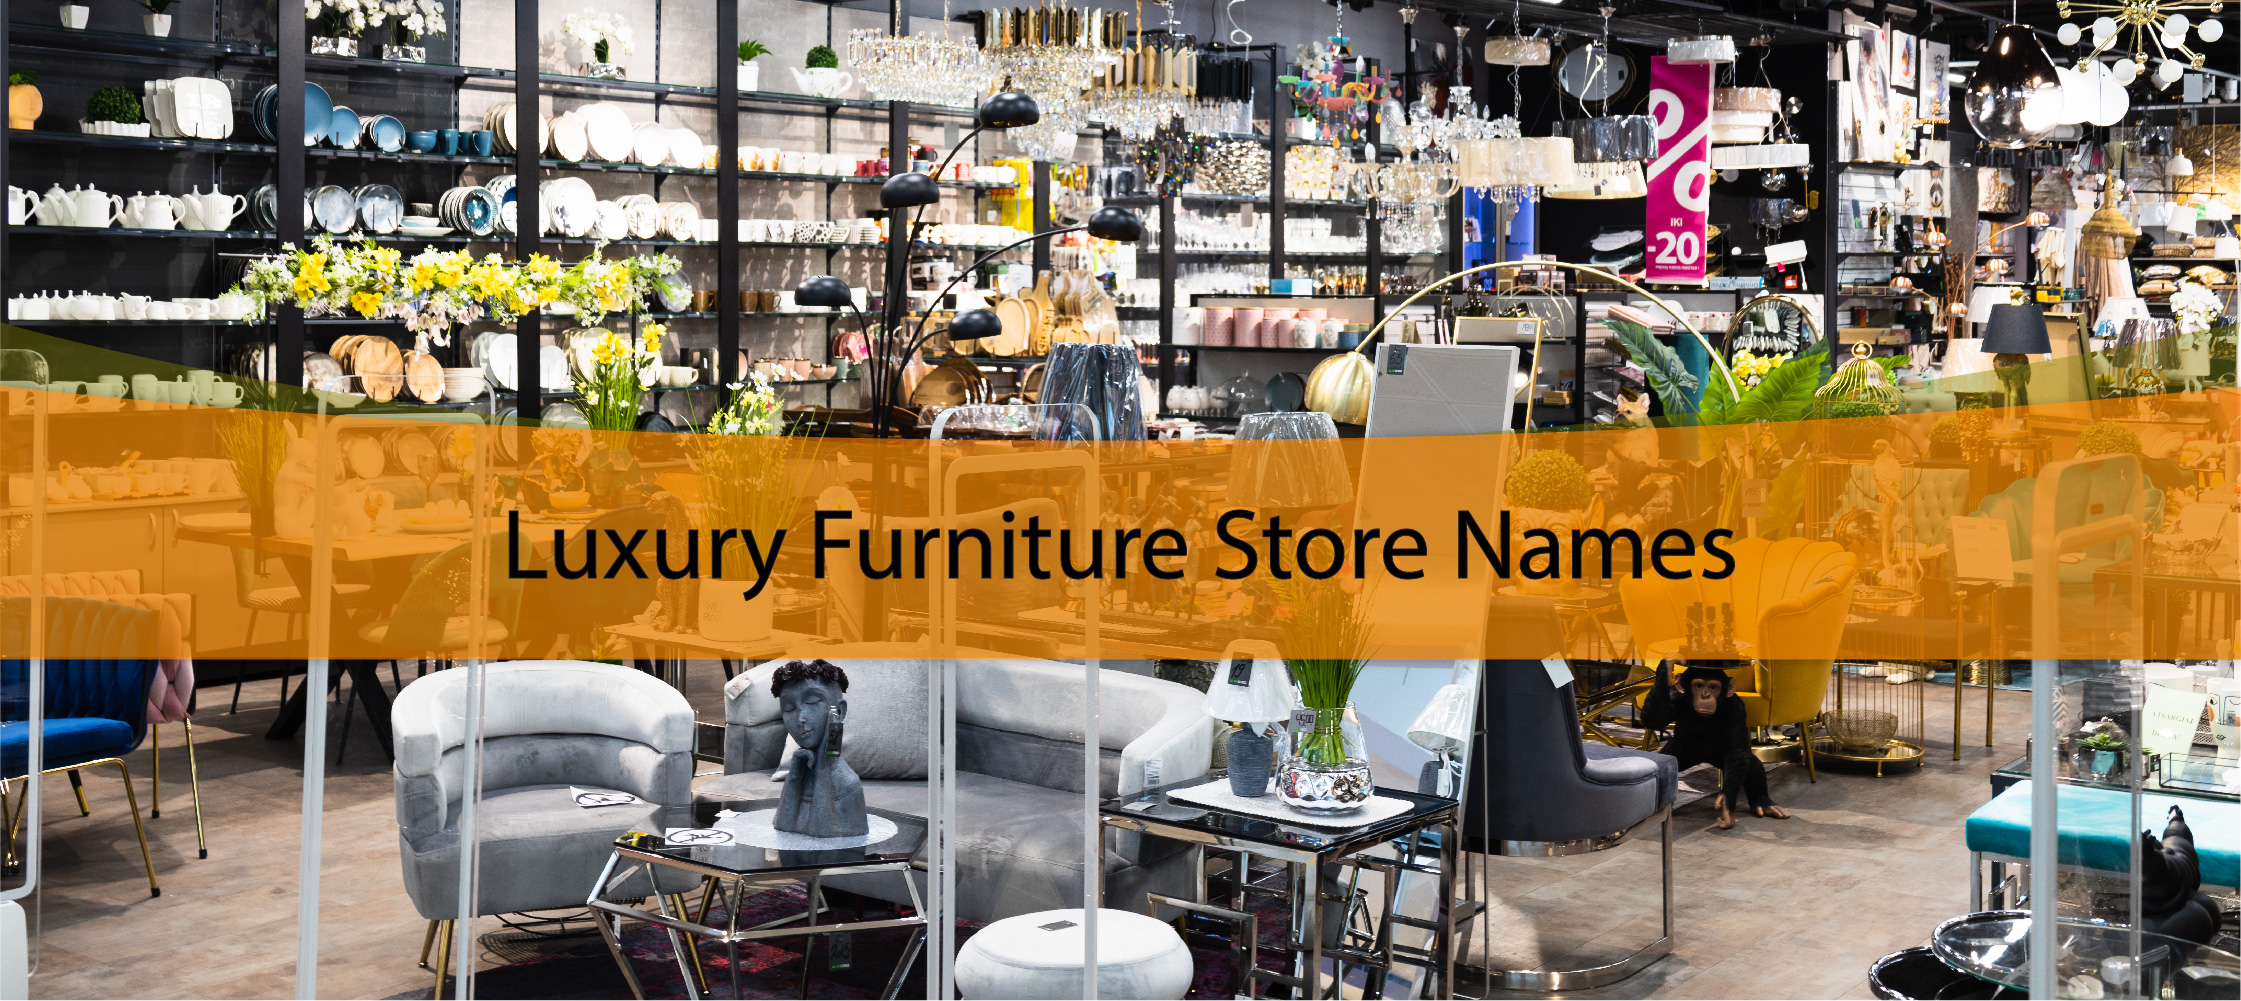 Luxury Furniture Store Names